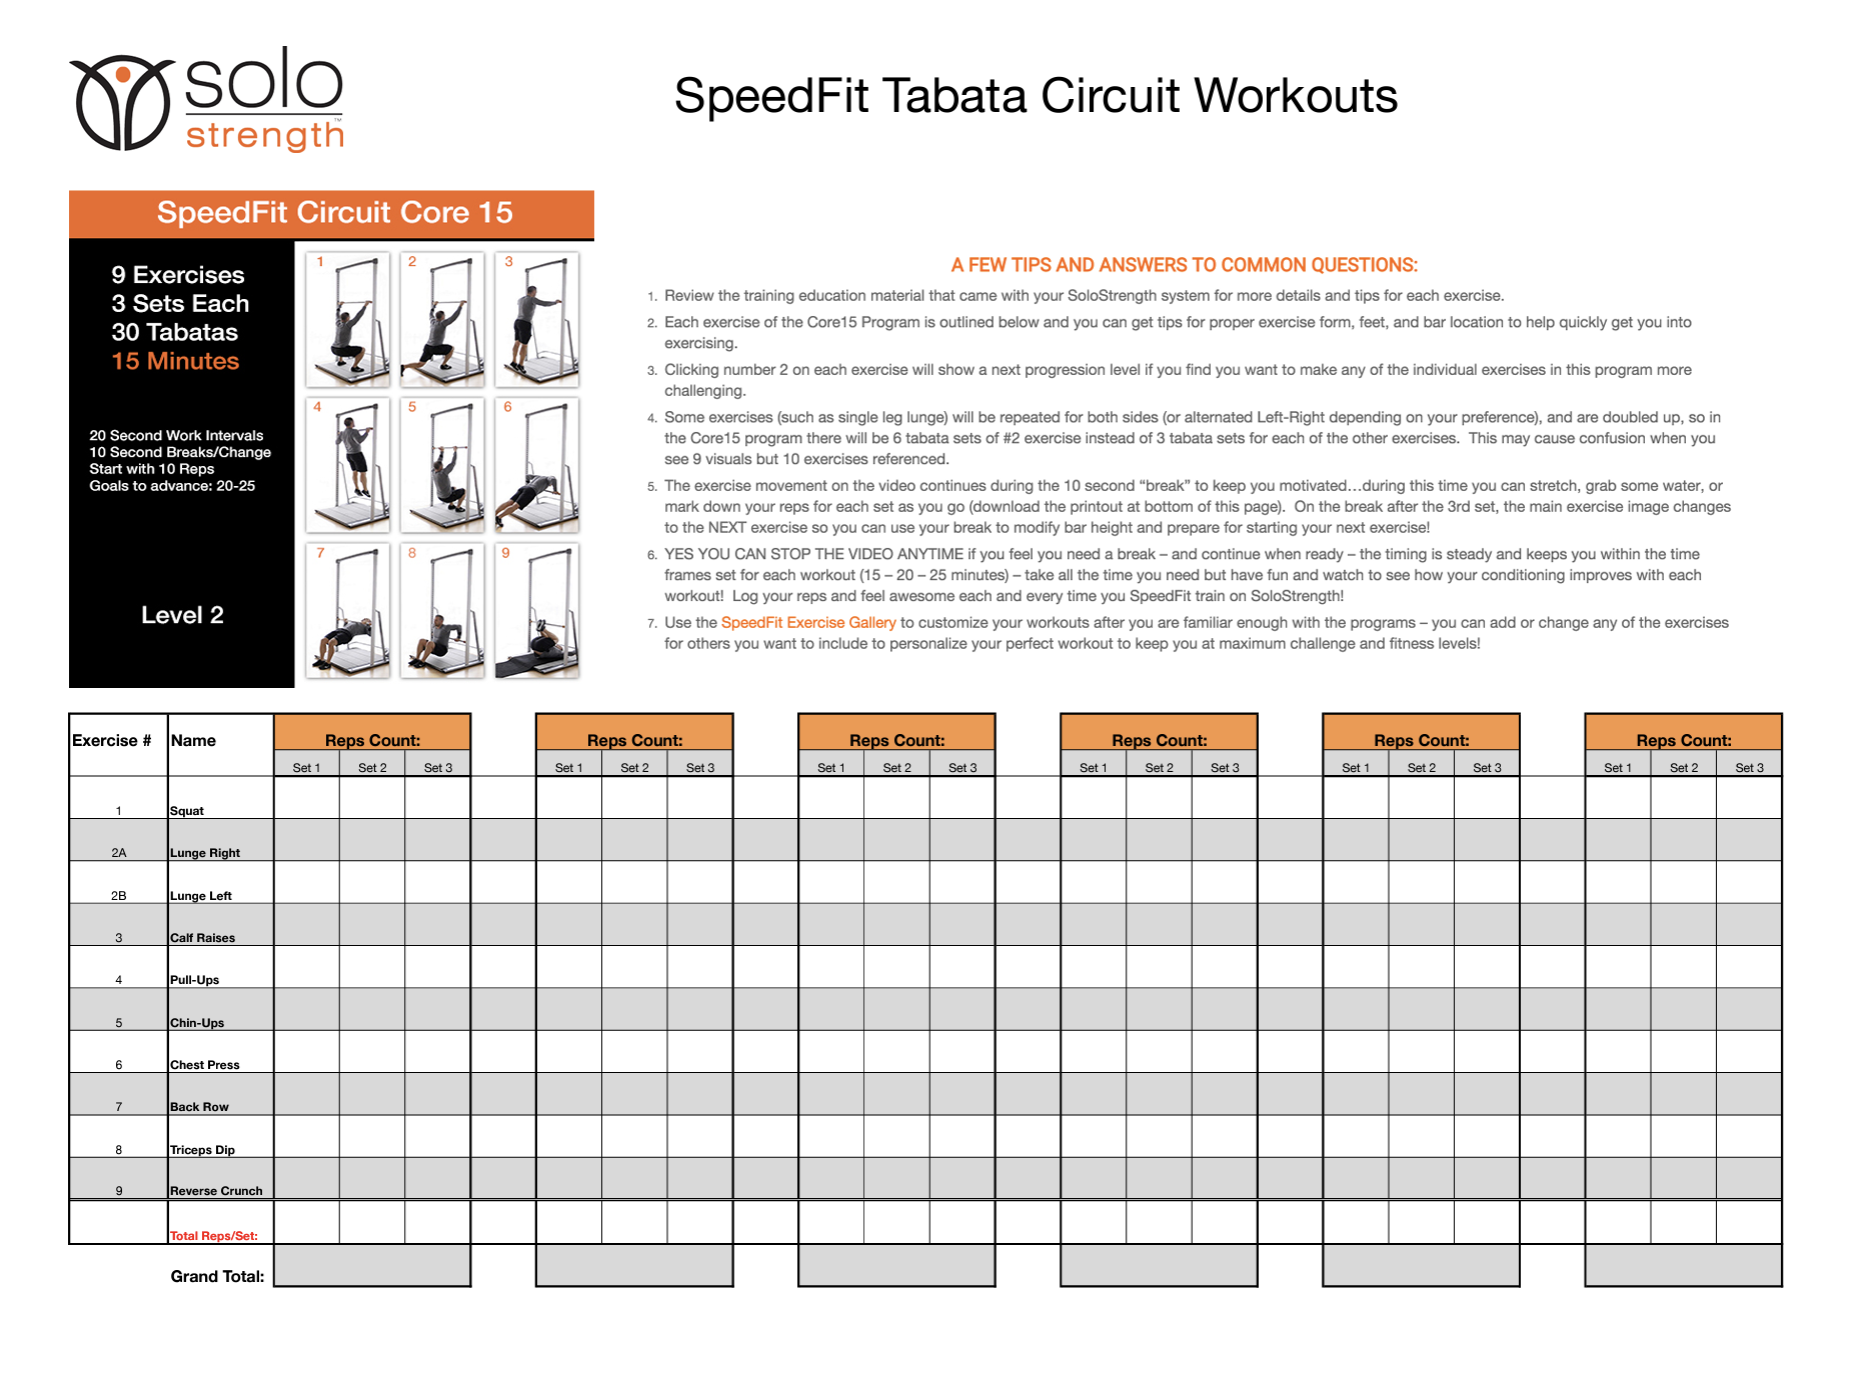 speedfit tabata circuit workout bodyweight exercise program for home gym